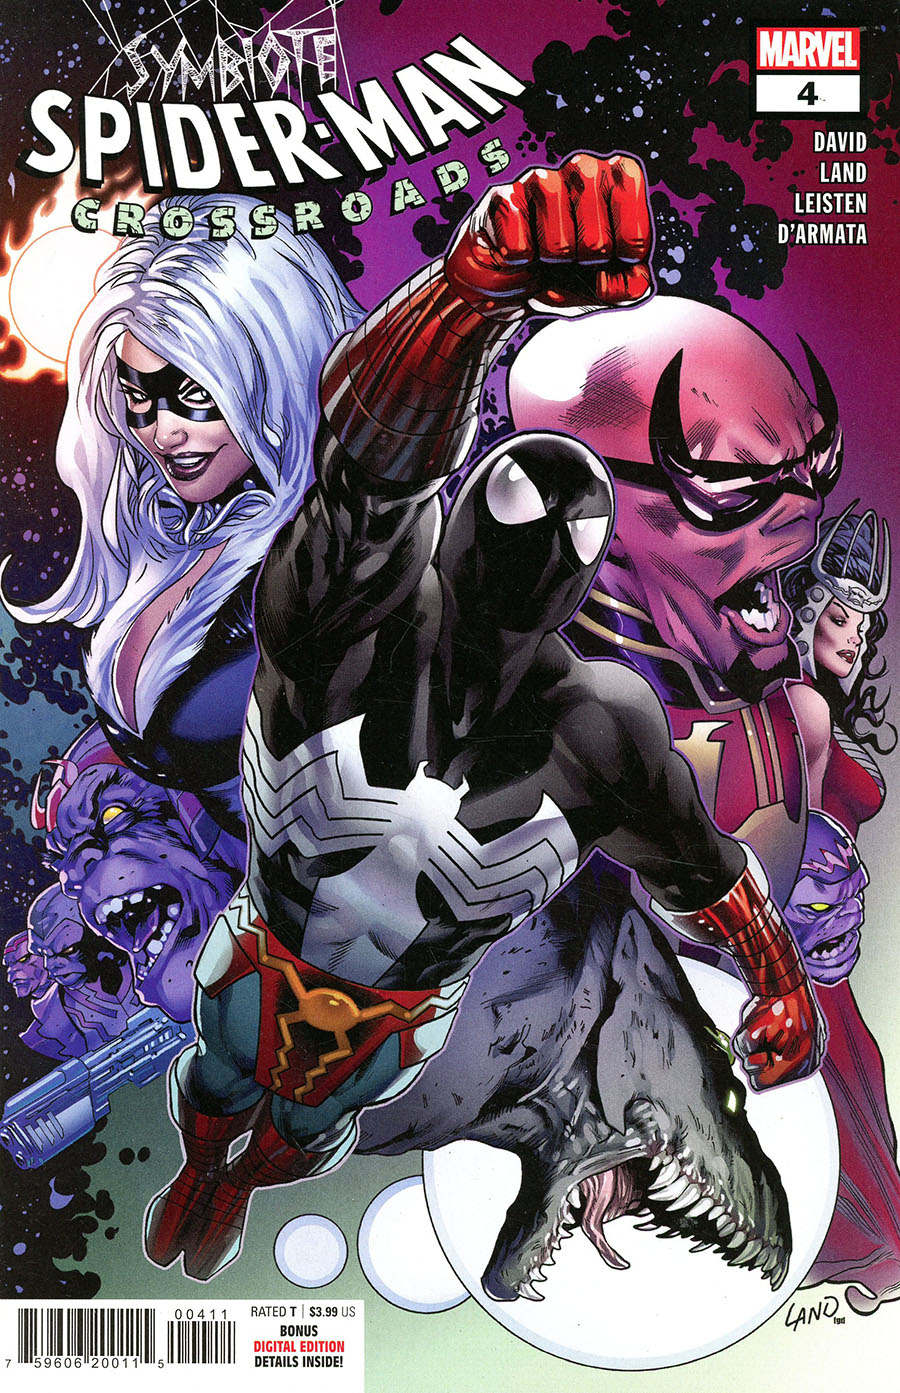 Symbiote Spider-Man Crossroads #4 Cover A Regular Greg Land Cover